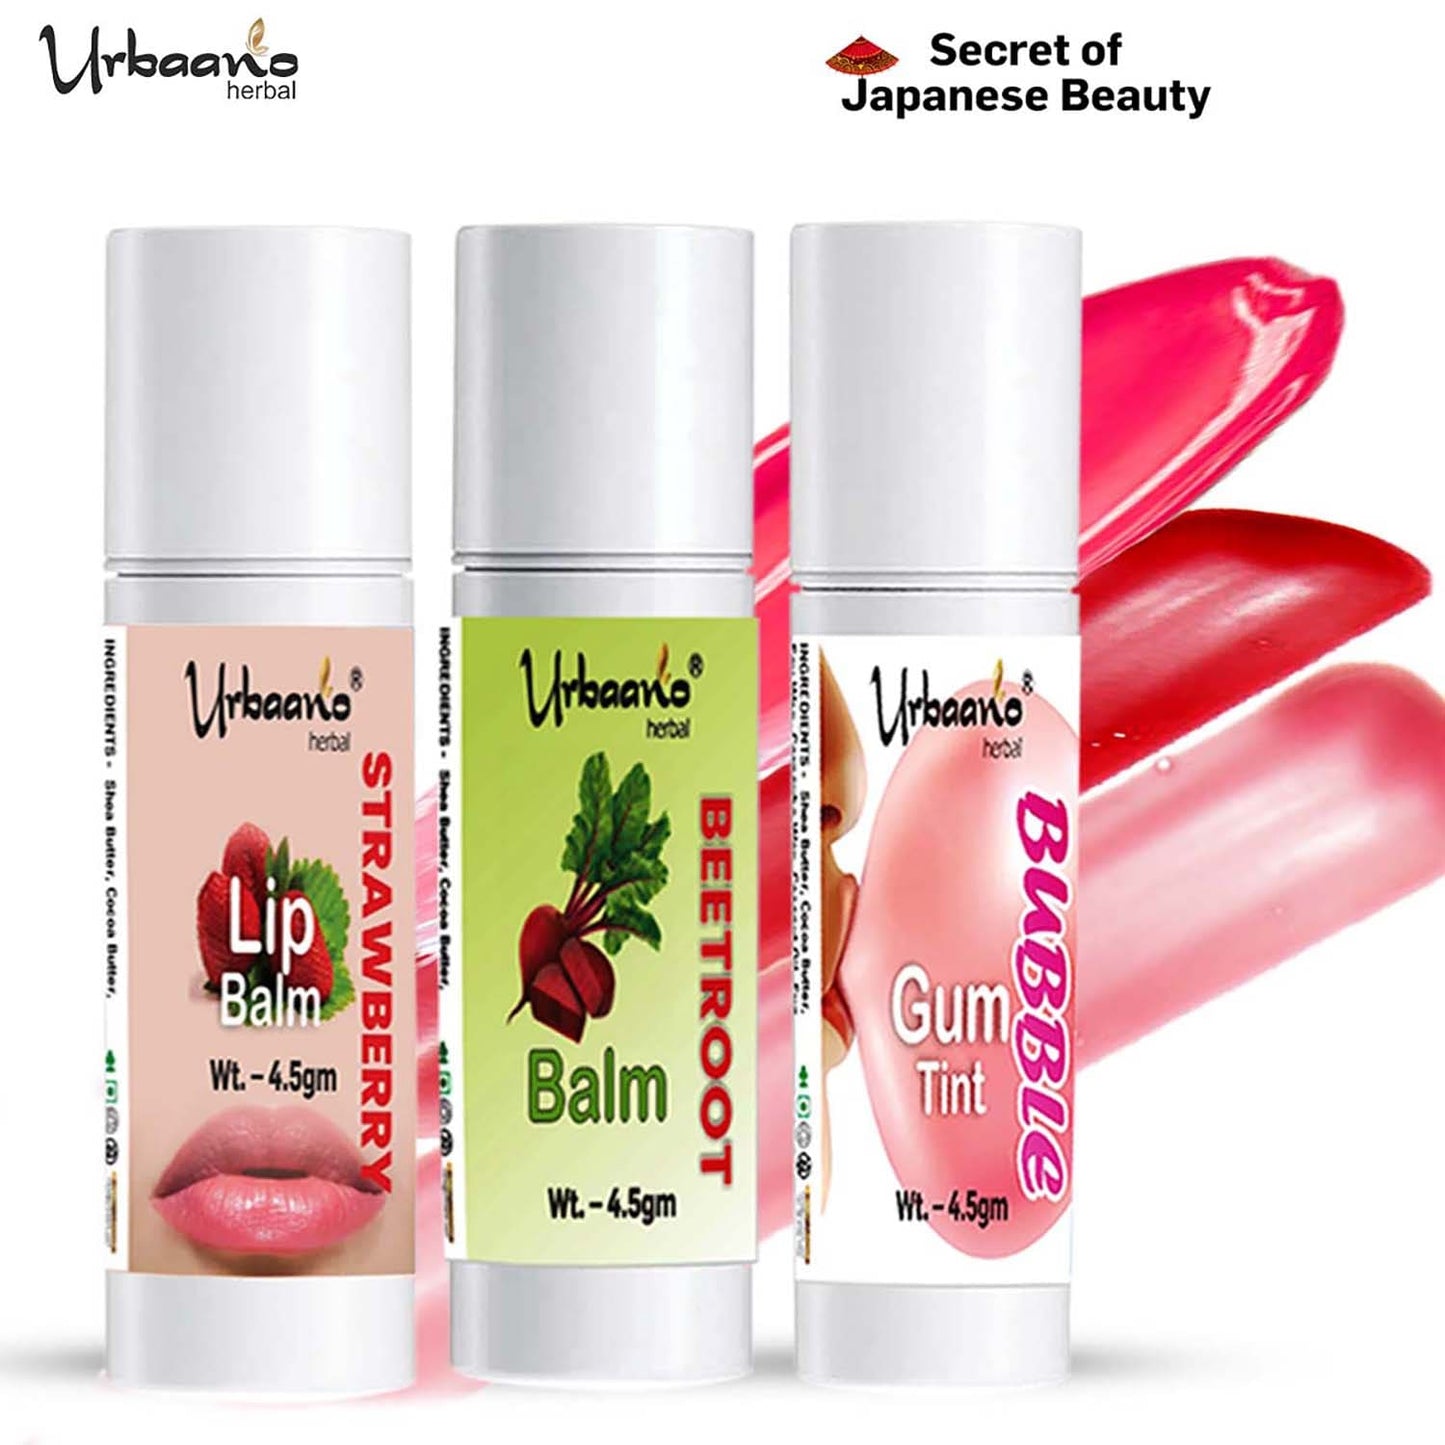 100% Natural Hydronic Tinted Lip & Cheek Balm for Women & Teens Shades of 3 Pink (Special  Code - "LIPCARE")